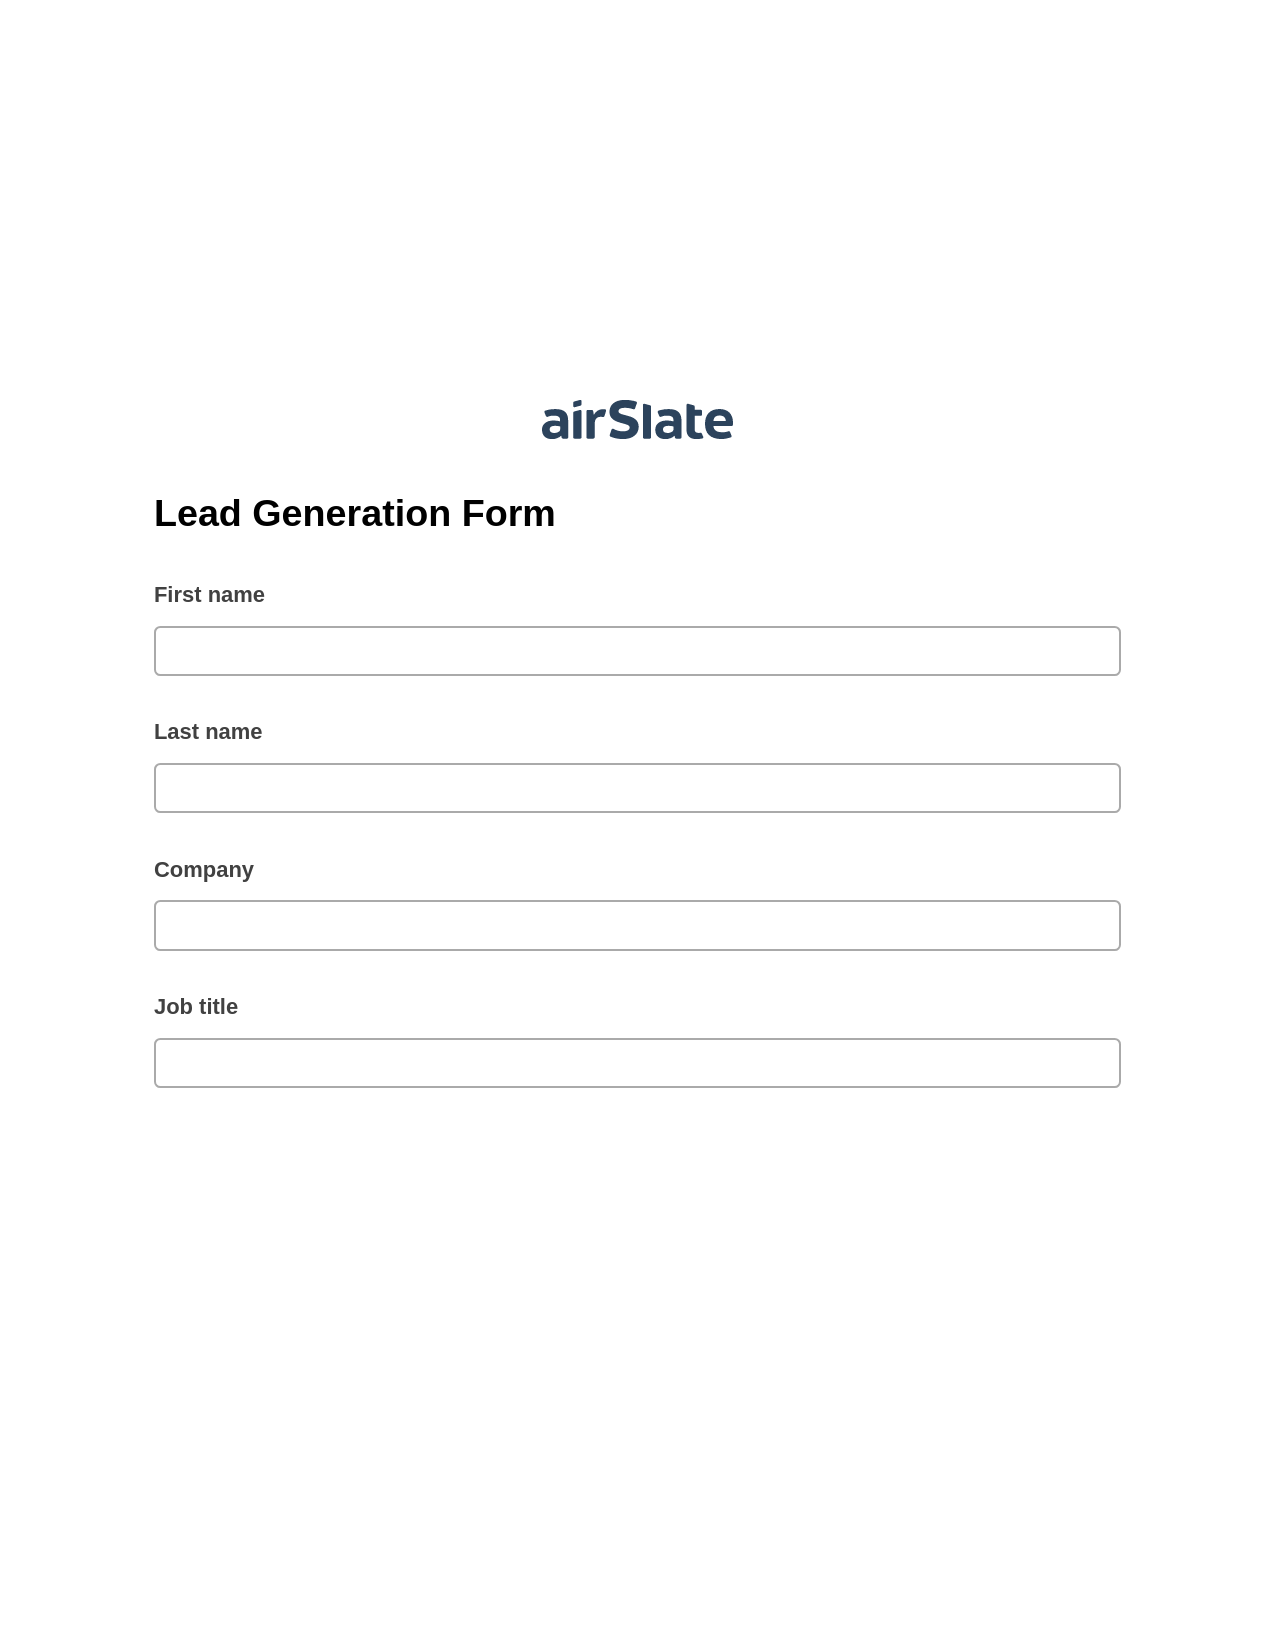 Multirole Lead Generation Form Pre-fill from Salesforce Records with SOQL Bot, Remove Tags From Slate Bot, Archive to Box Bot